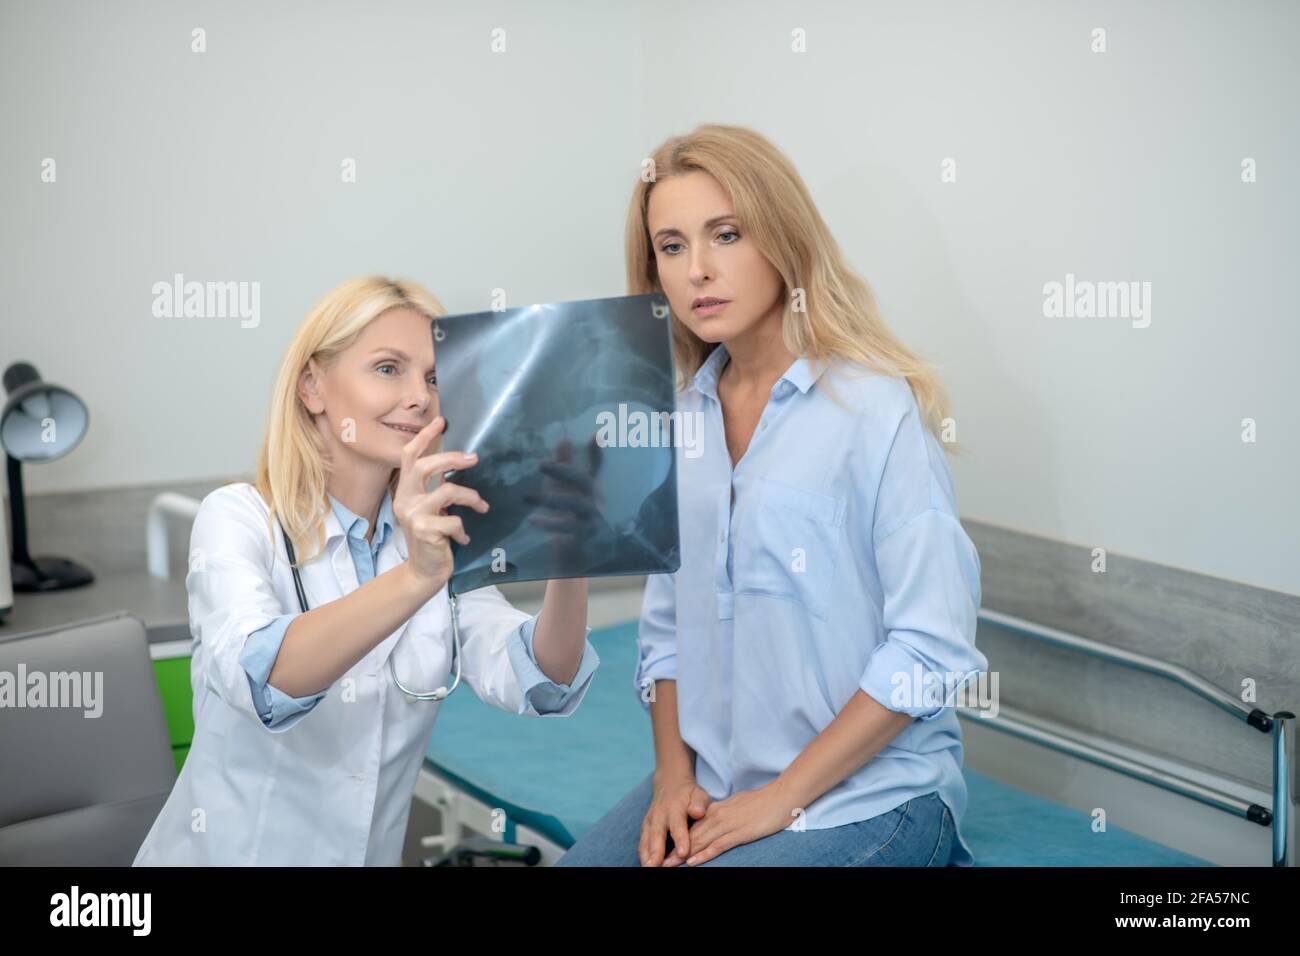 Doctor showing x-ray to interested patient Stock Photo